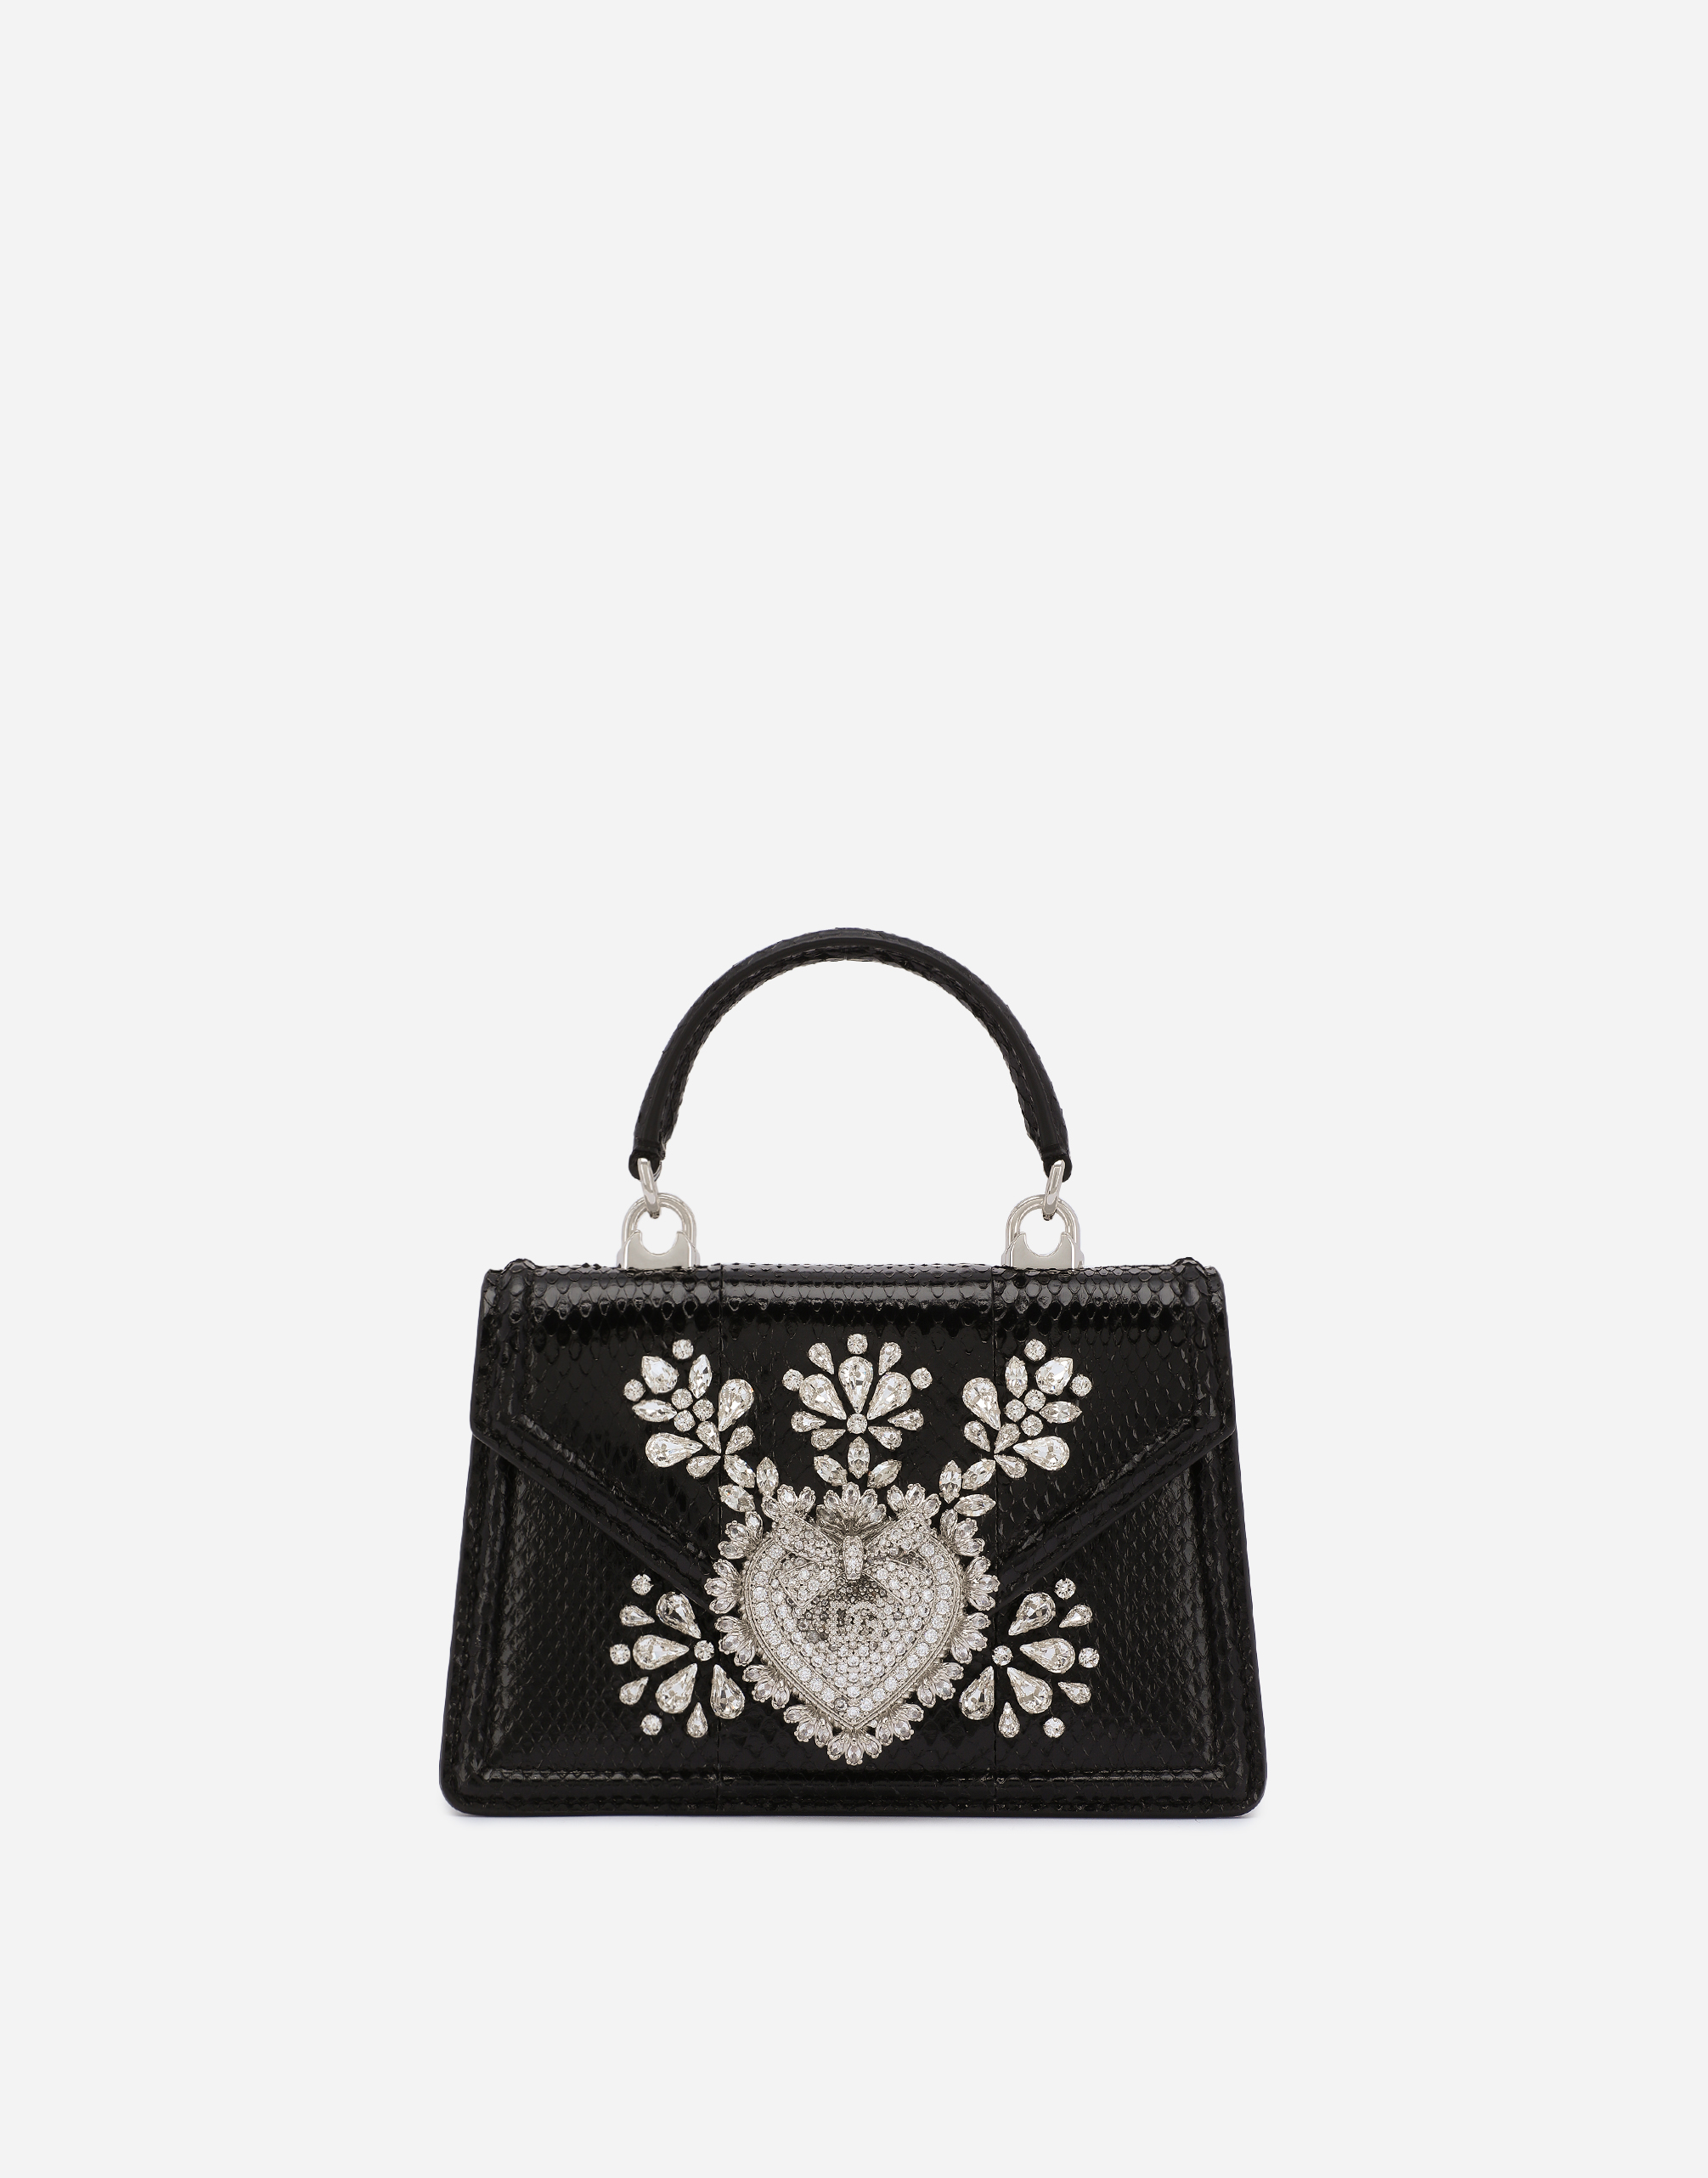 Small ayers Devotion bag with embellishment in Black